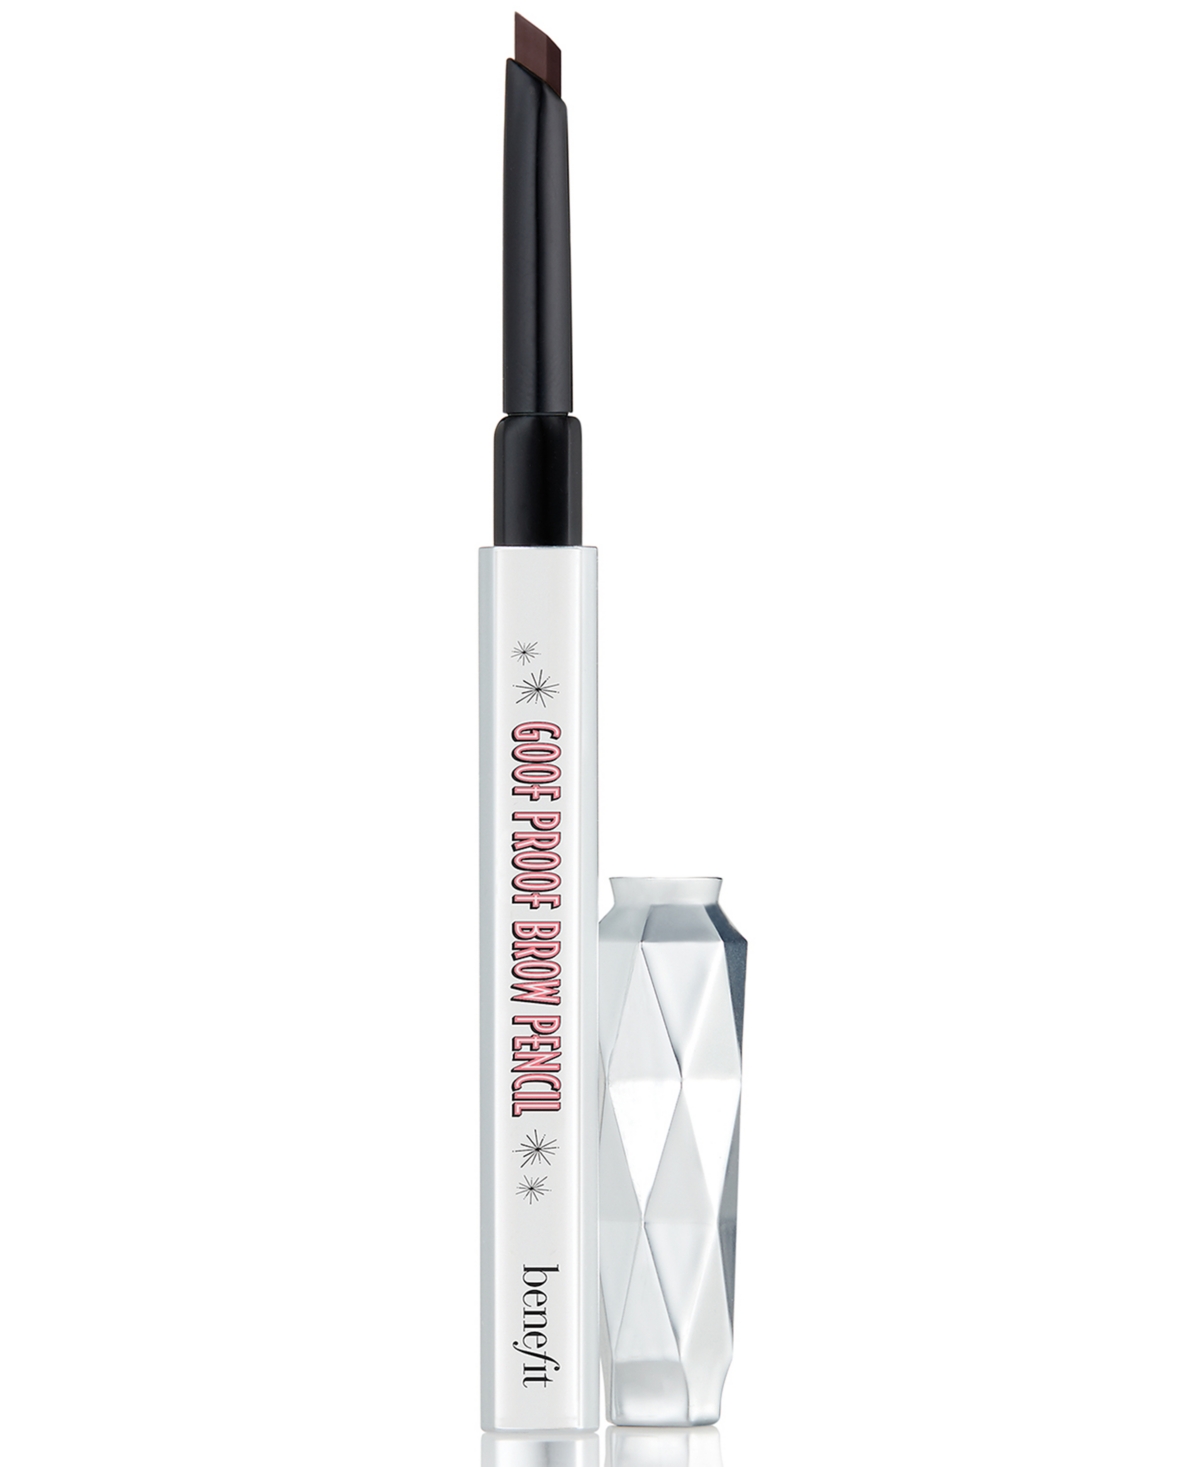 Benefit Cosmetics Goof Proof Waterproof Easy Shape & Fill Eyebrow Pencil, Travel Size In Shade  - Deep (cool Black-brown)